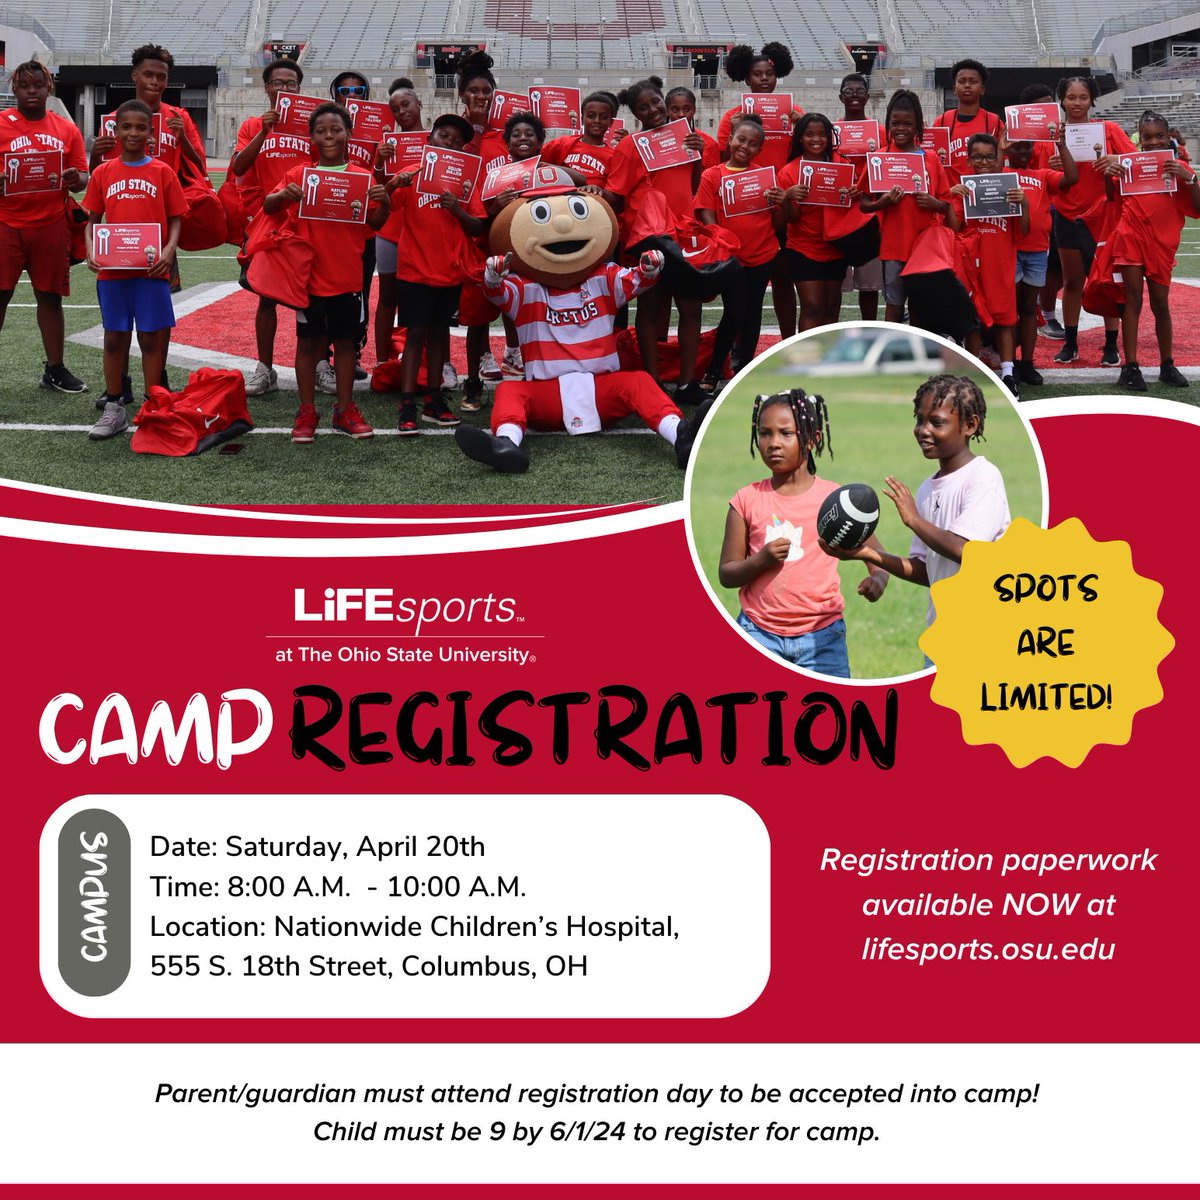 REMINDER: Registration is now LIVE for the 2024 LiFEsports Summer Camp at Ohio State! Head to the website below to fill out your registration paperwork, and make sure to be in attendance this Saturday, April 20th for Registration Day! bit.ly/3TJ3xnf